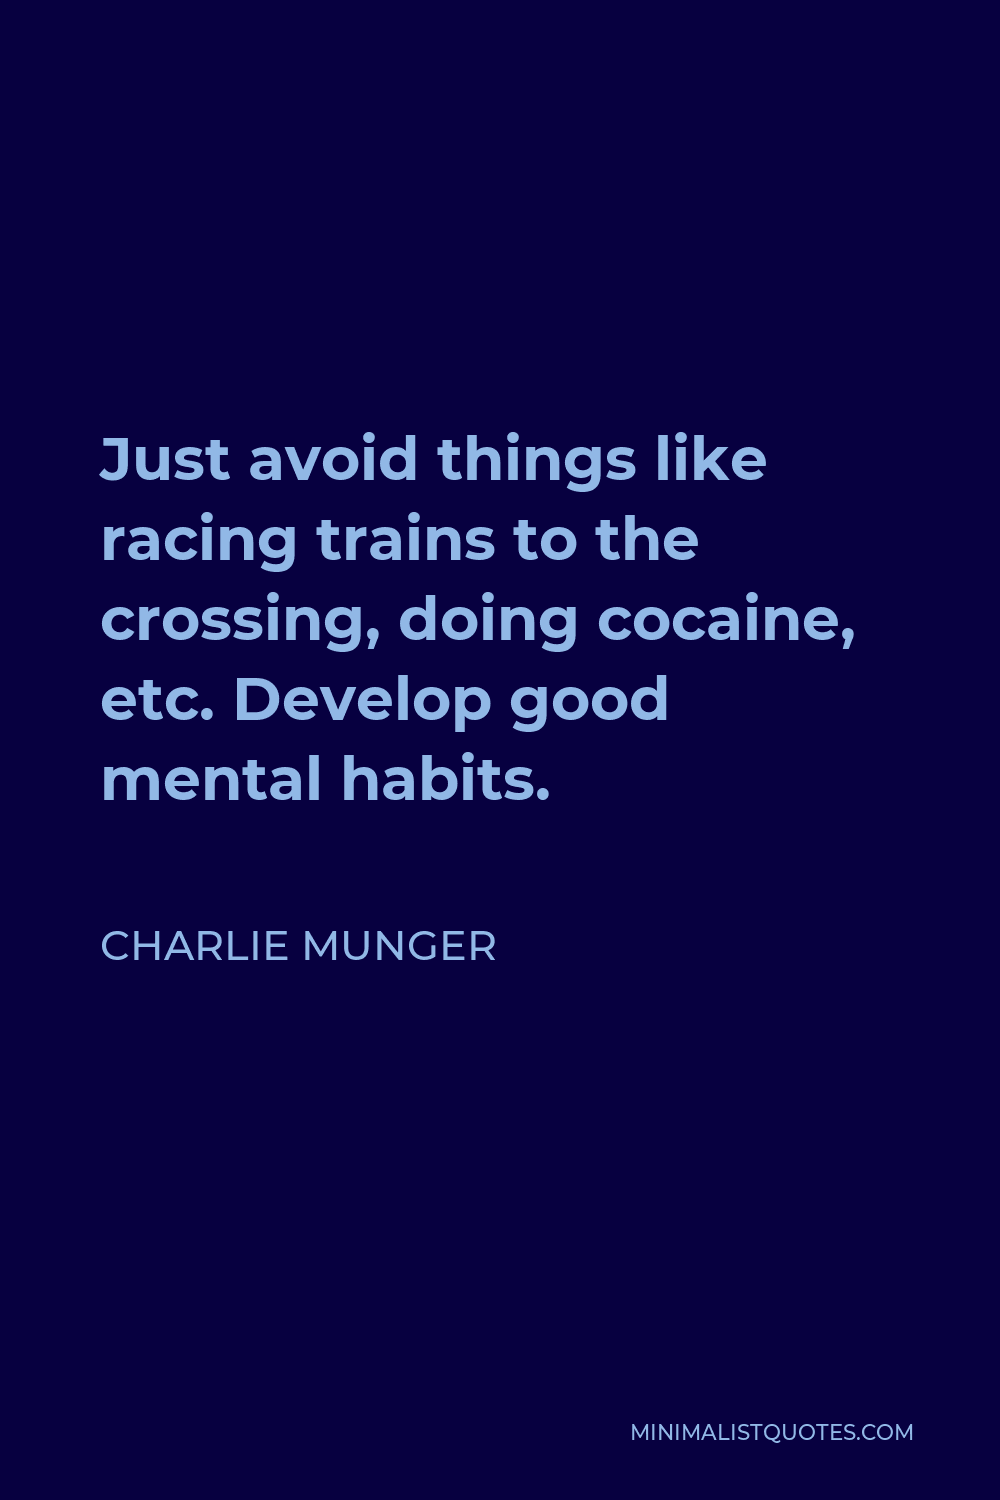 Charlie Munger Quote - Just avoid things like racing trains to the crossing, doing cocaine, etc. Develop good mental habits.